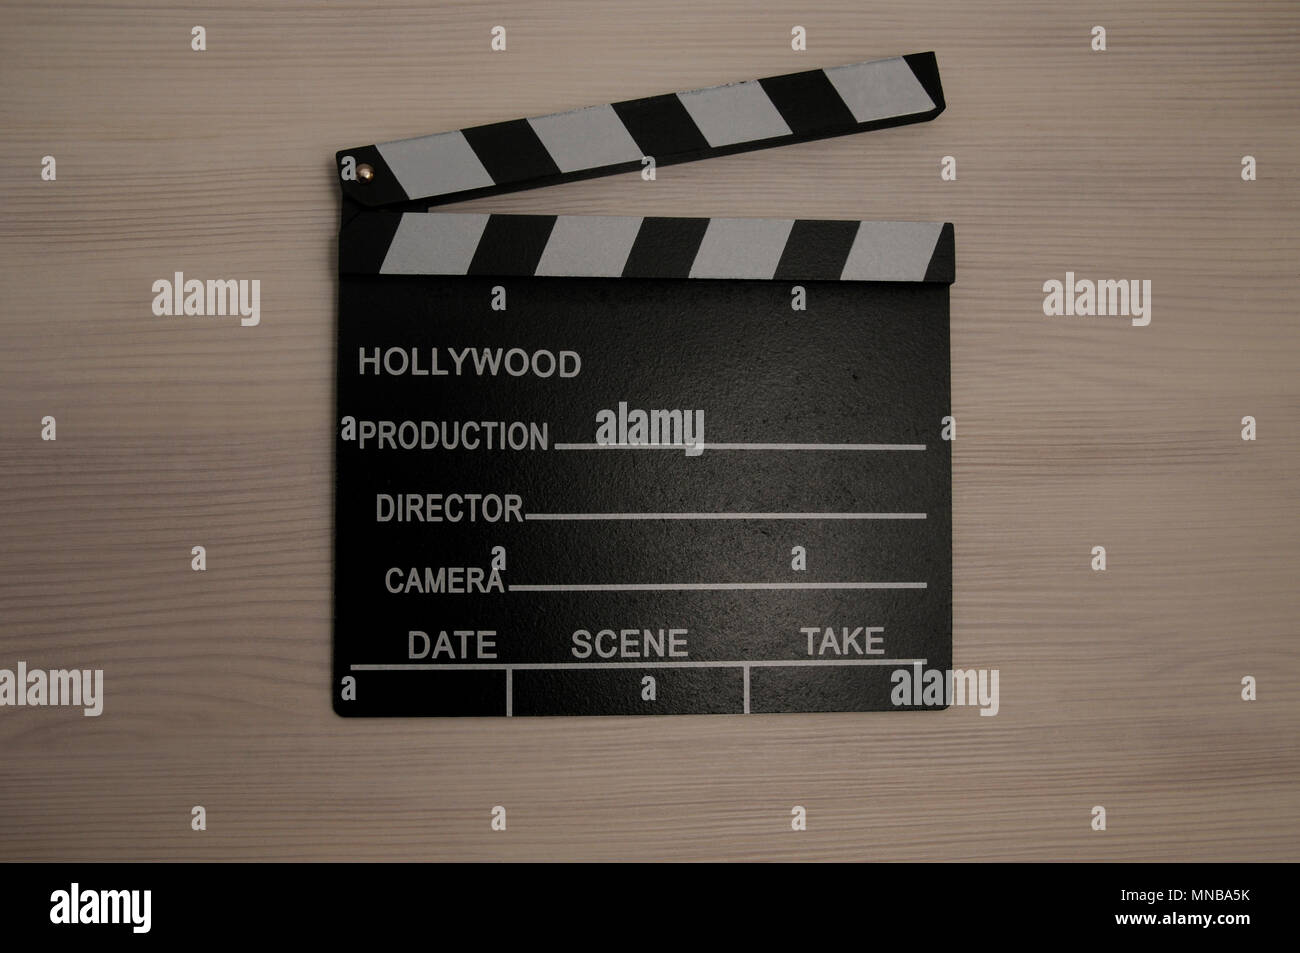 Clapboard on white wooden background Stock Photo